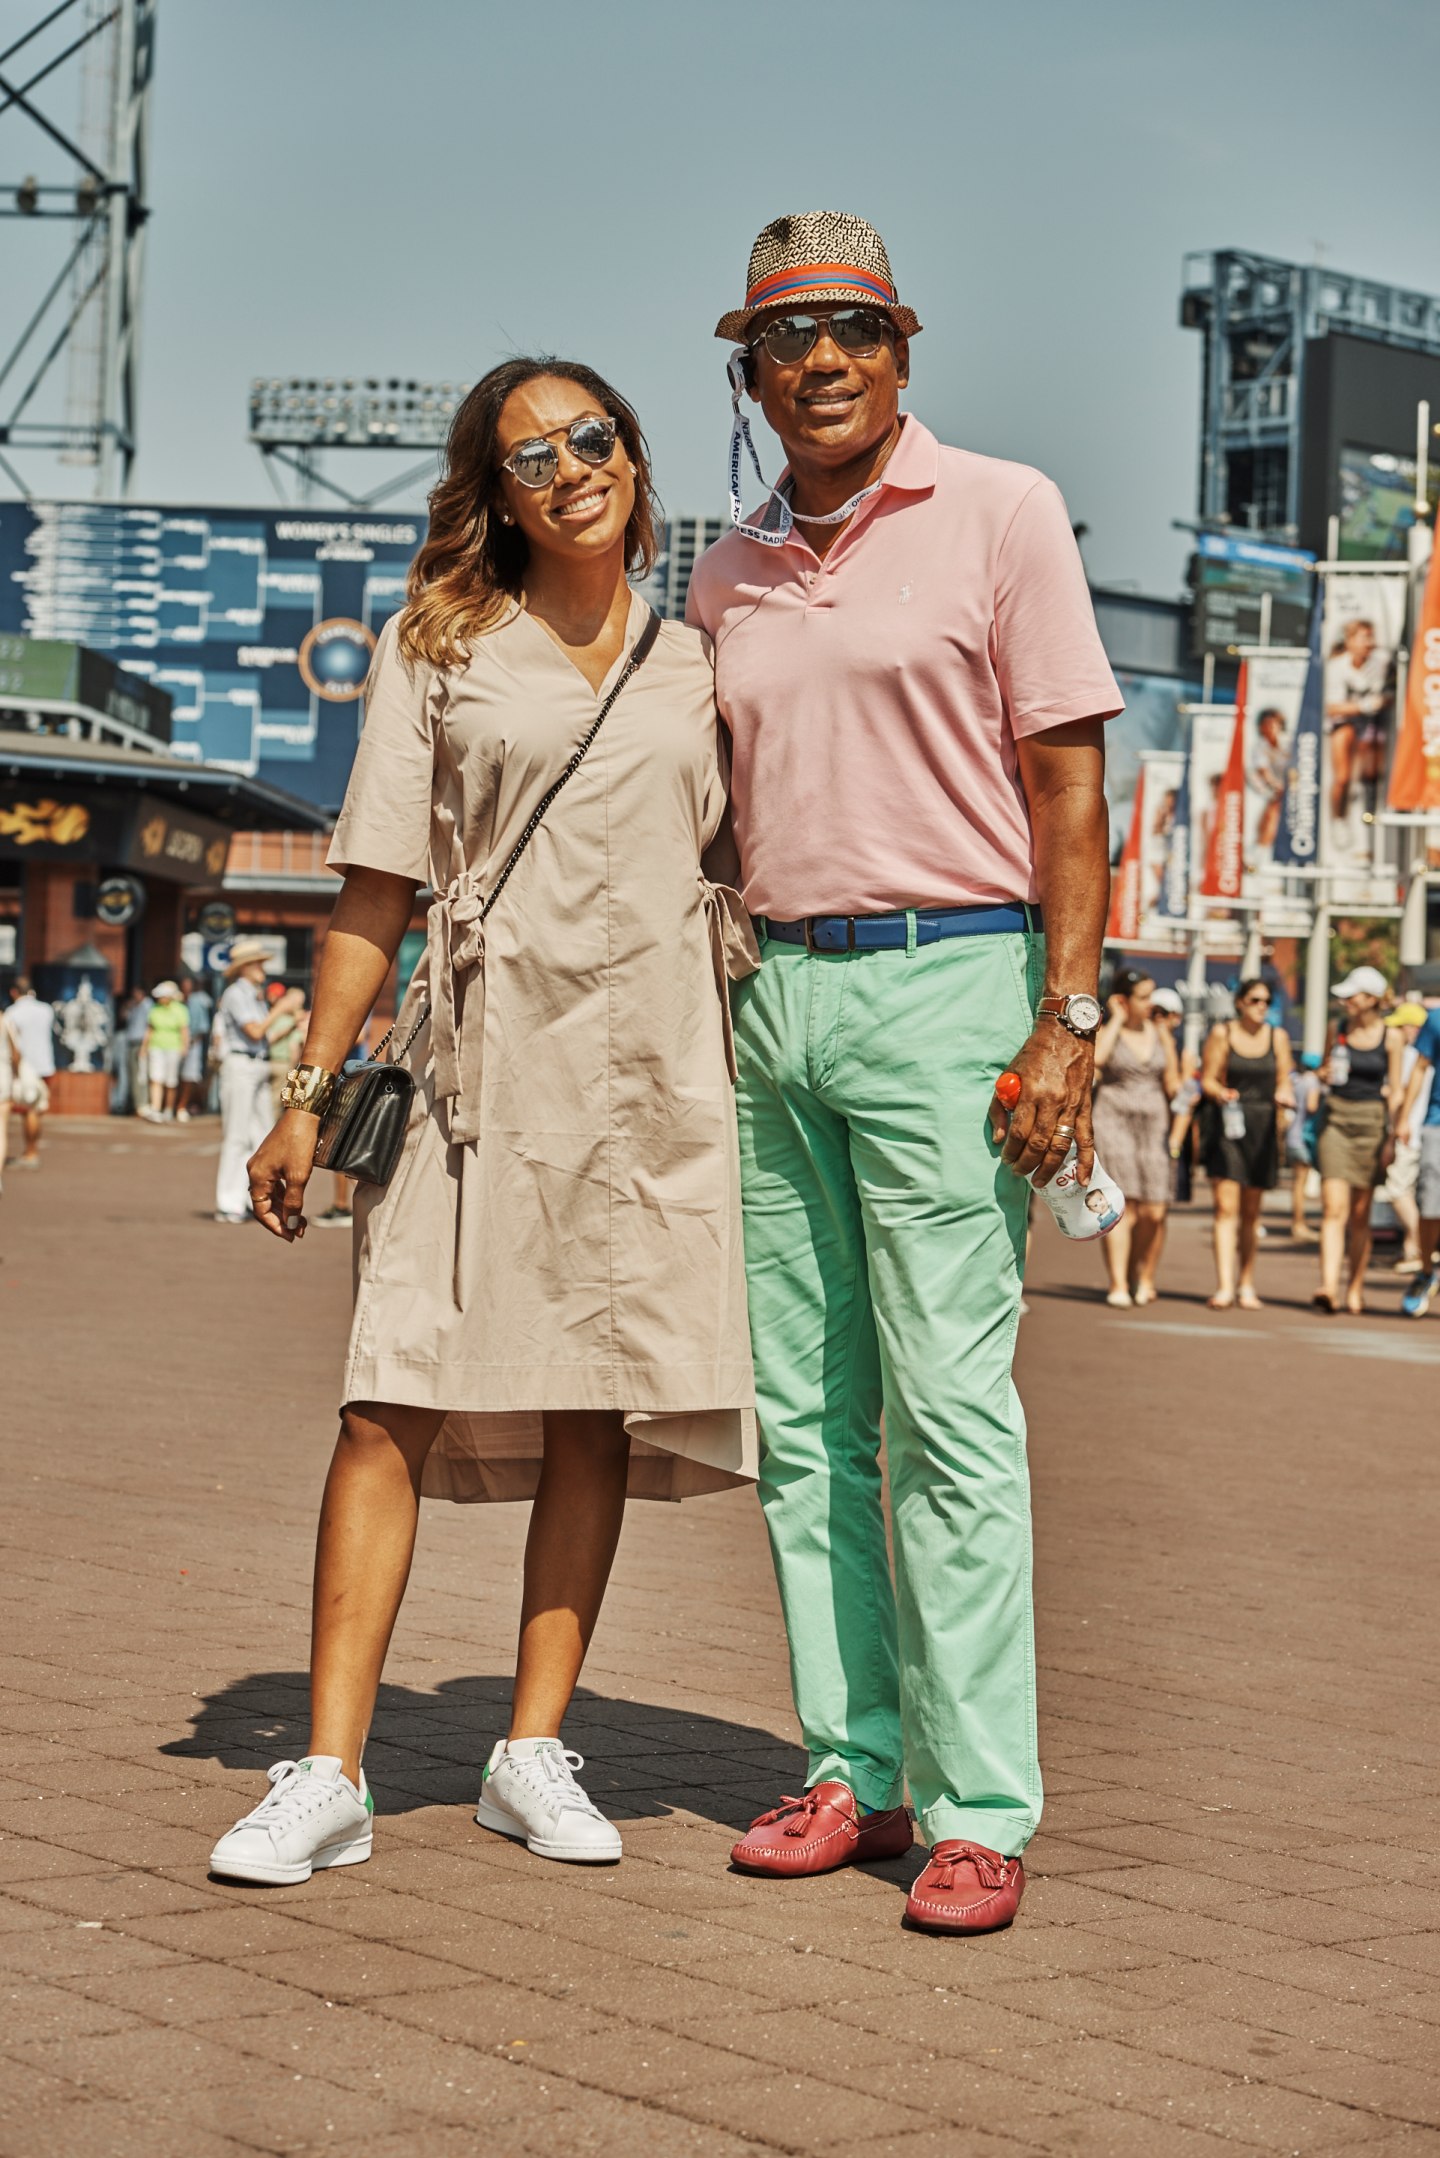 Here’s Some Unexpected Style Inspiration From The U.S. Open